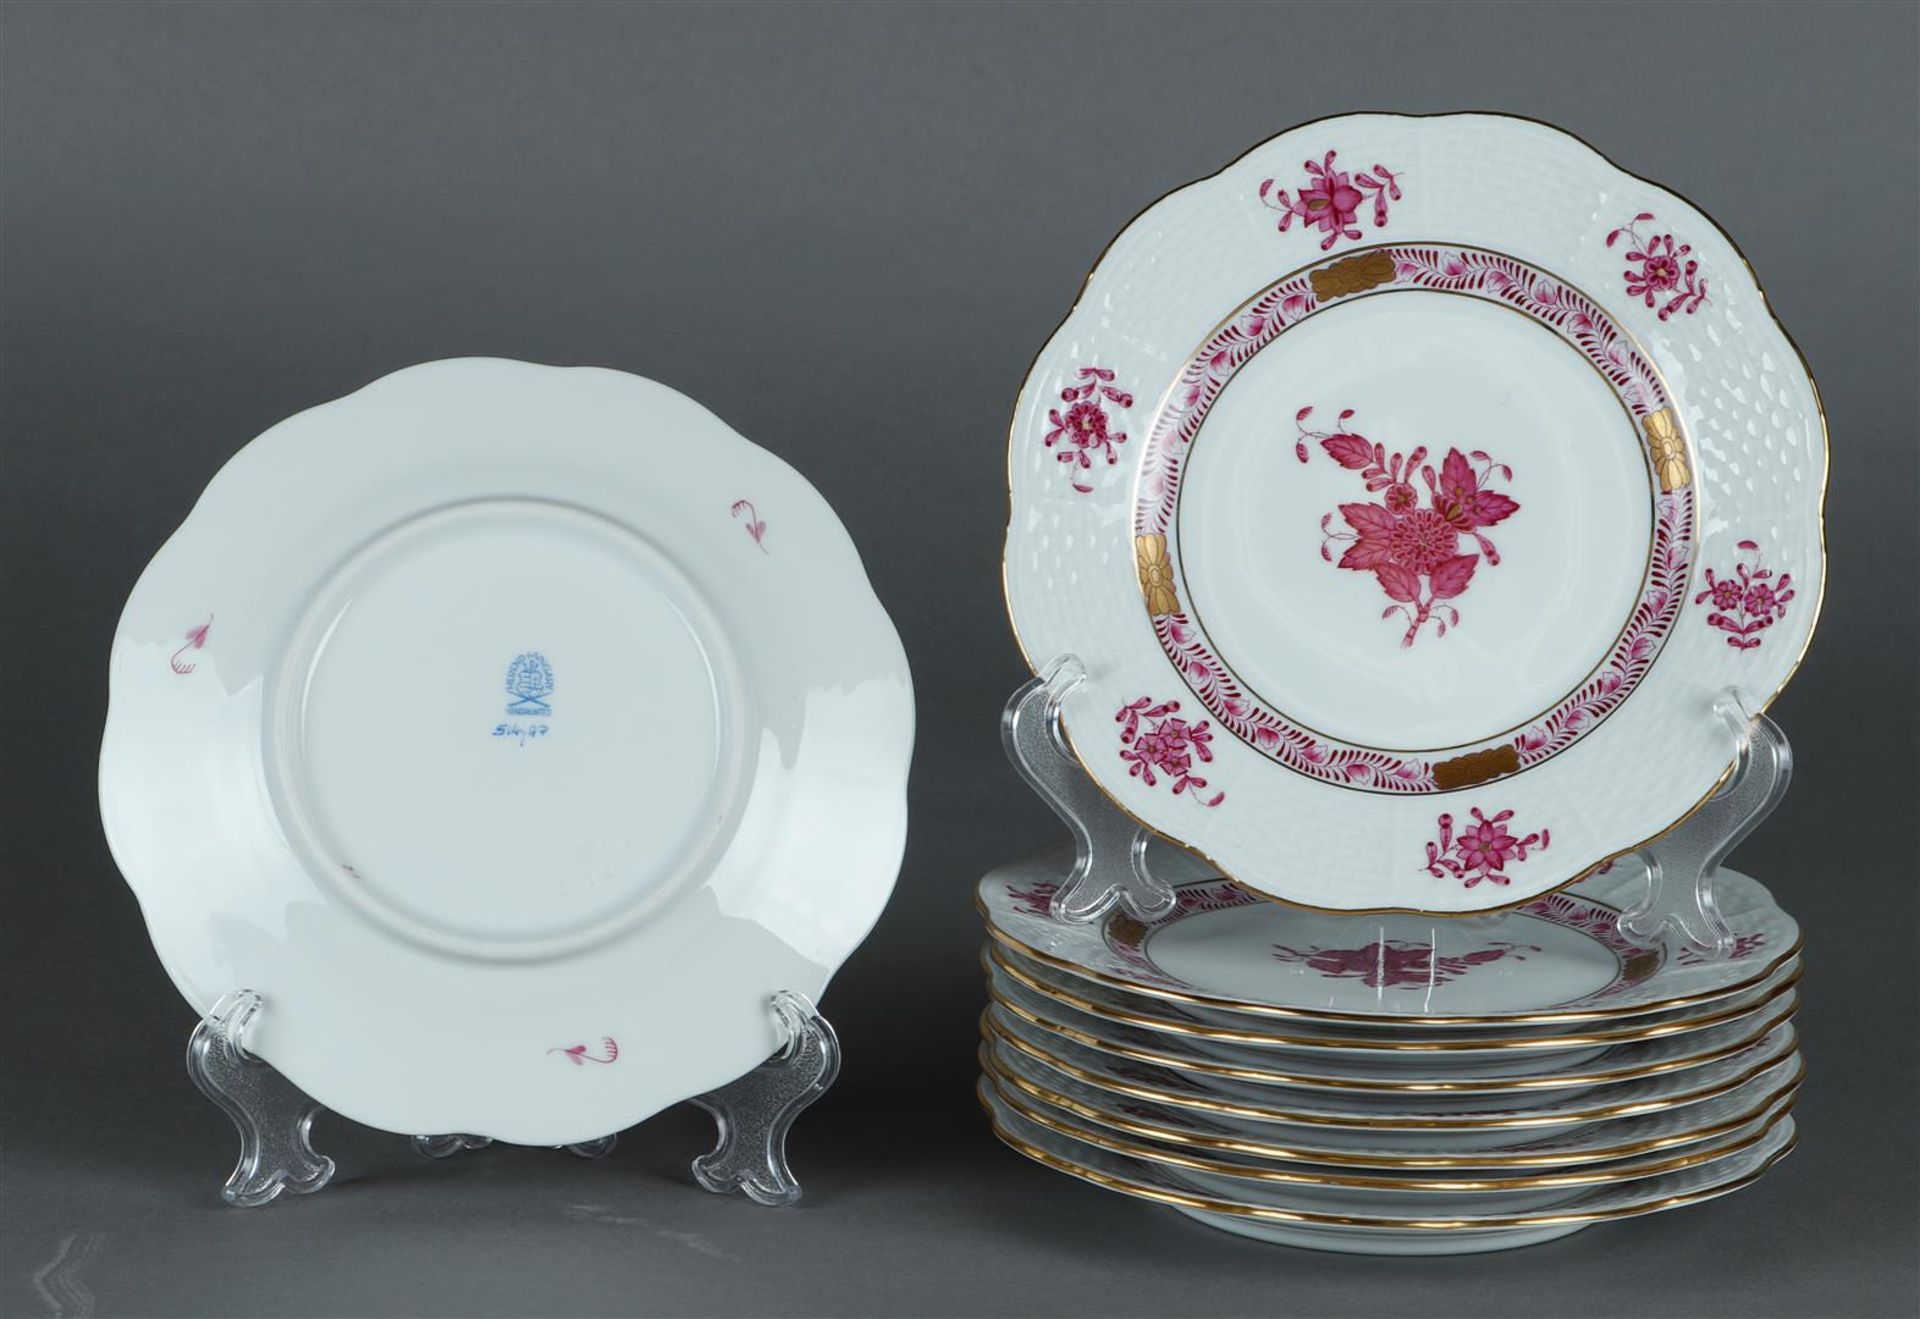 A set of 9 porcelain pie plates with apponyi purple decor. Herend, Hungary.